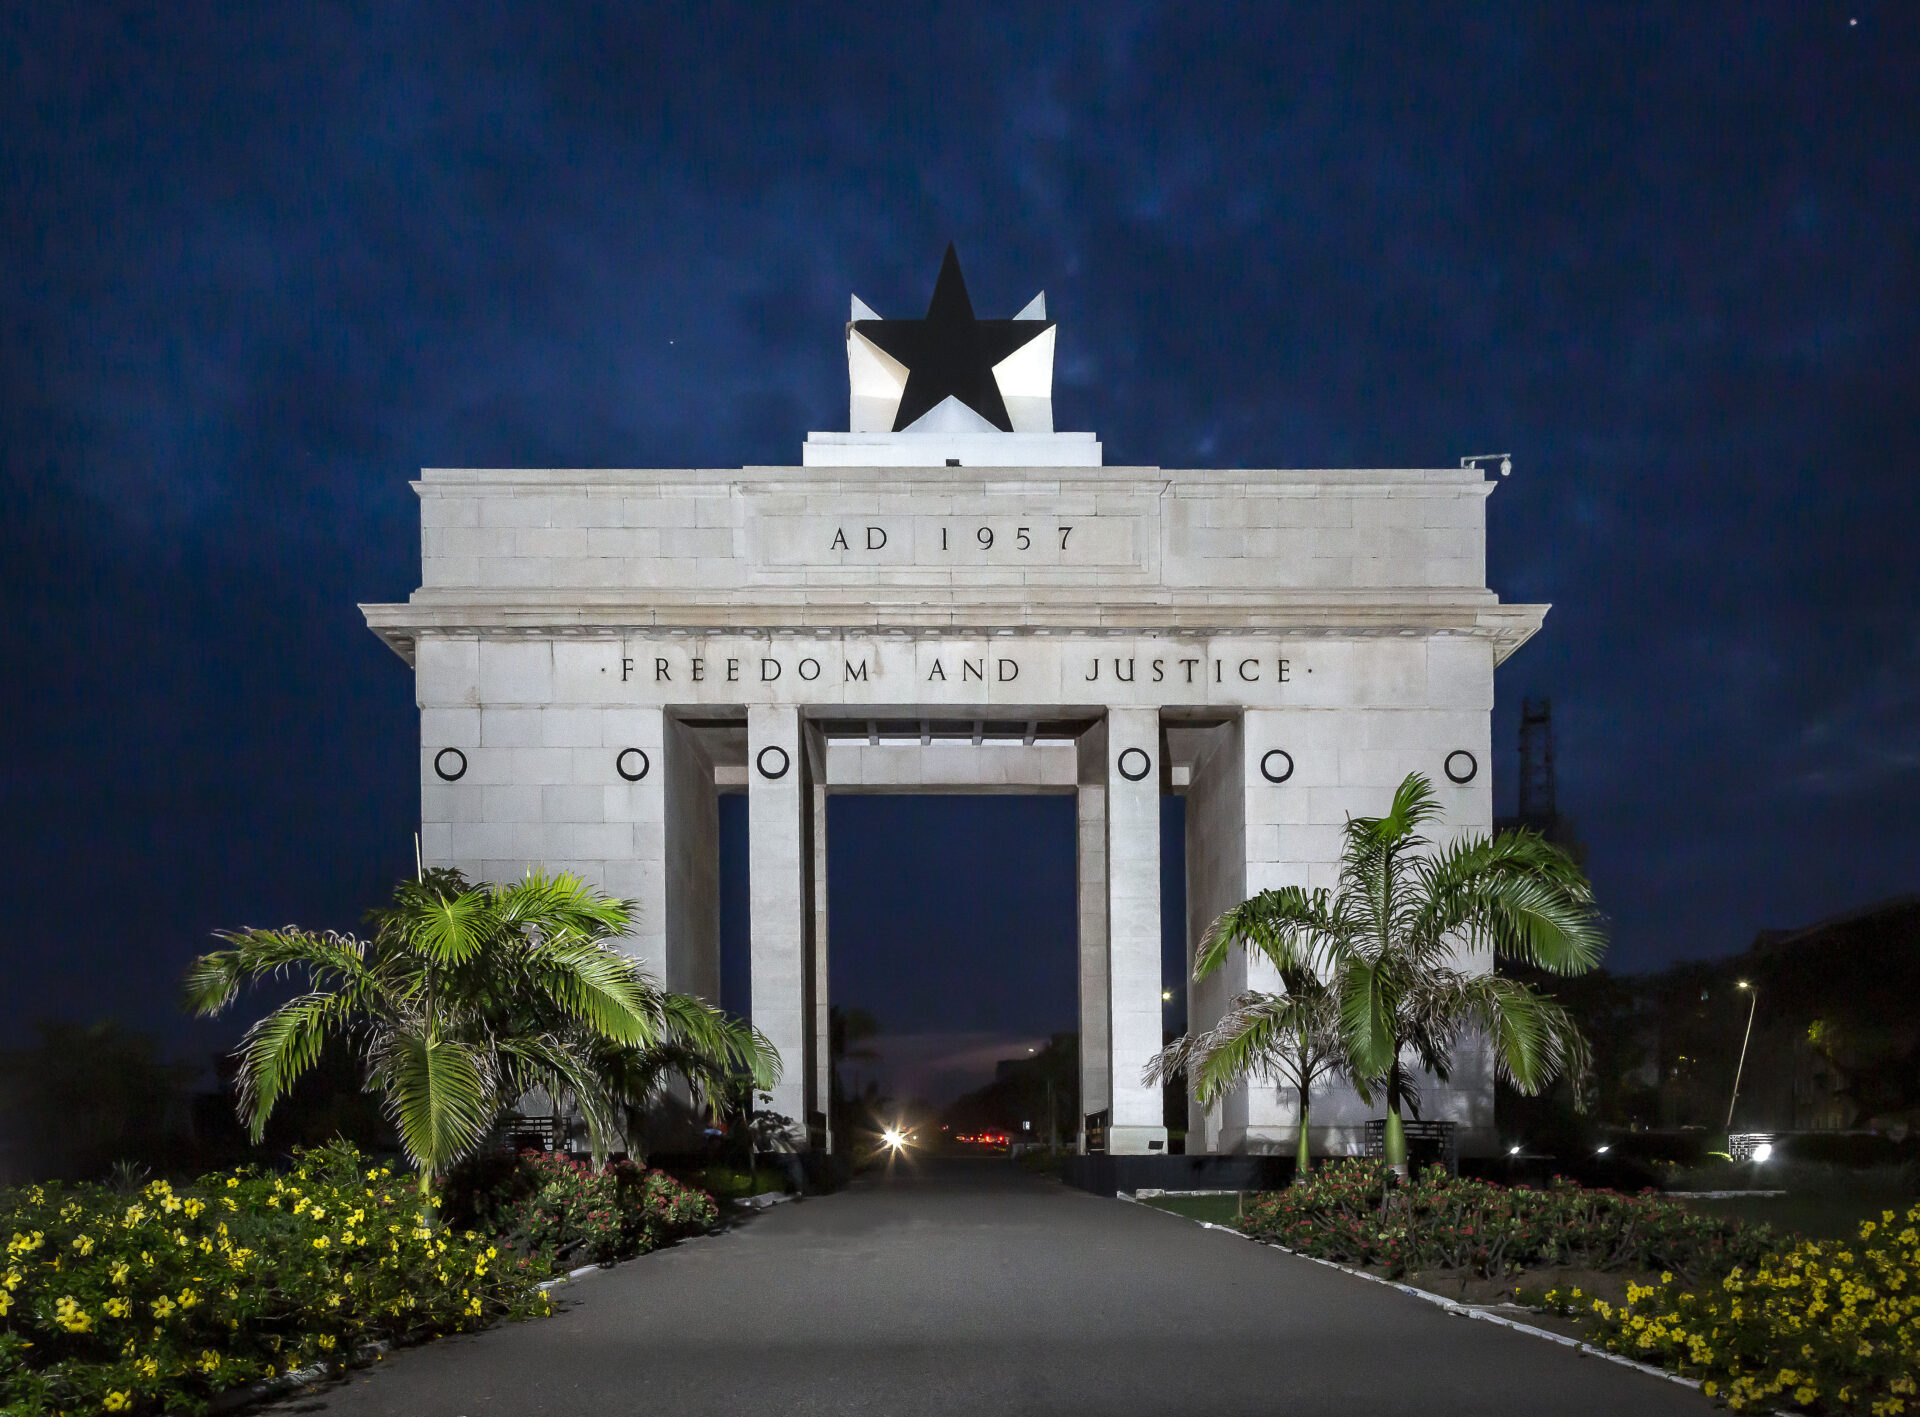 Black Star Square, Accra, Ghana. Painted with studio flash light